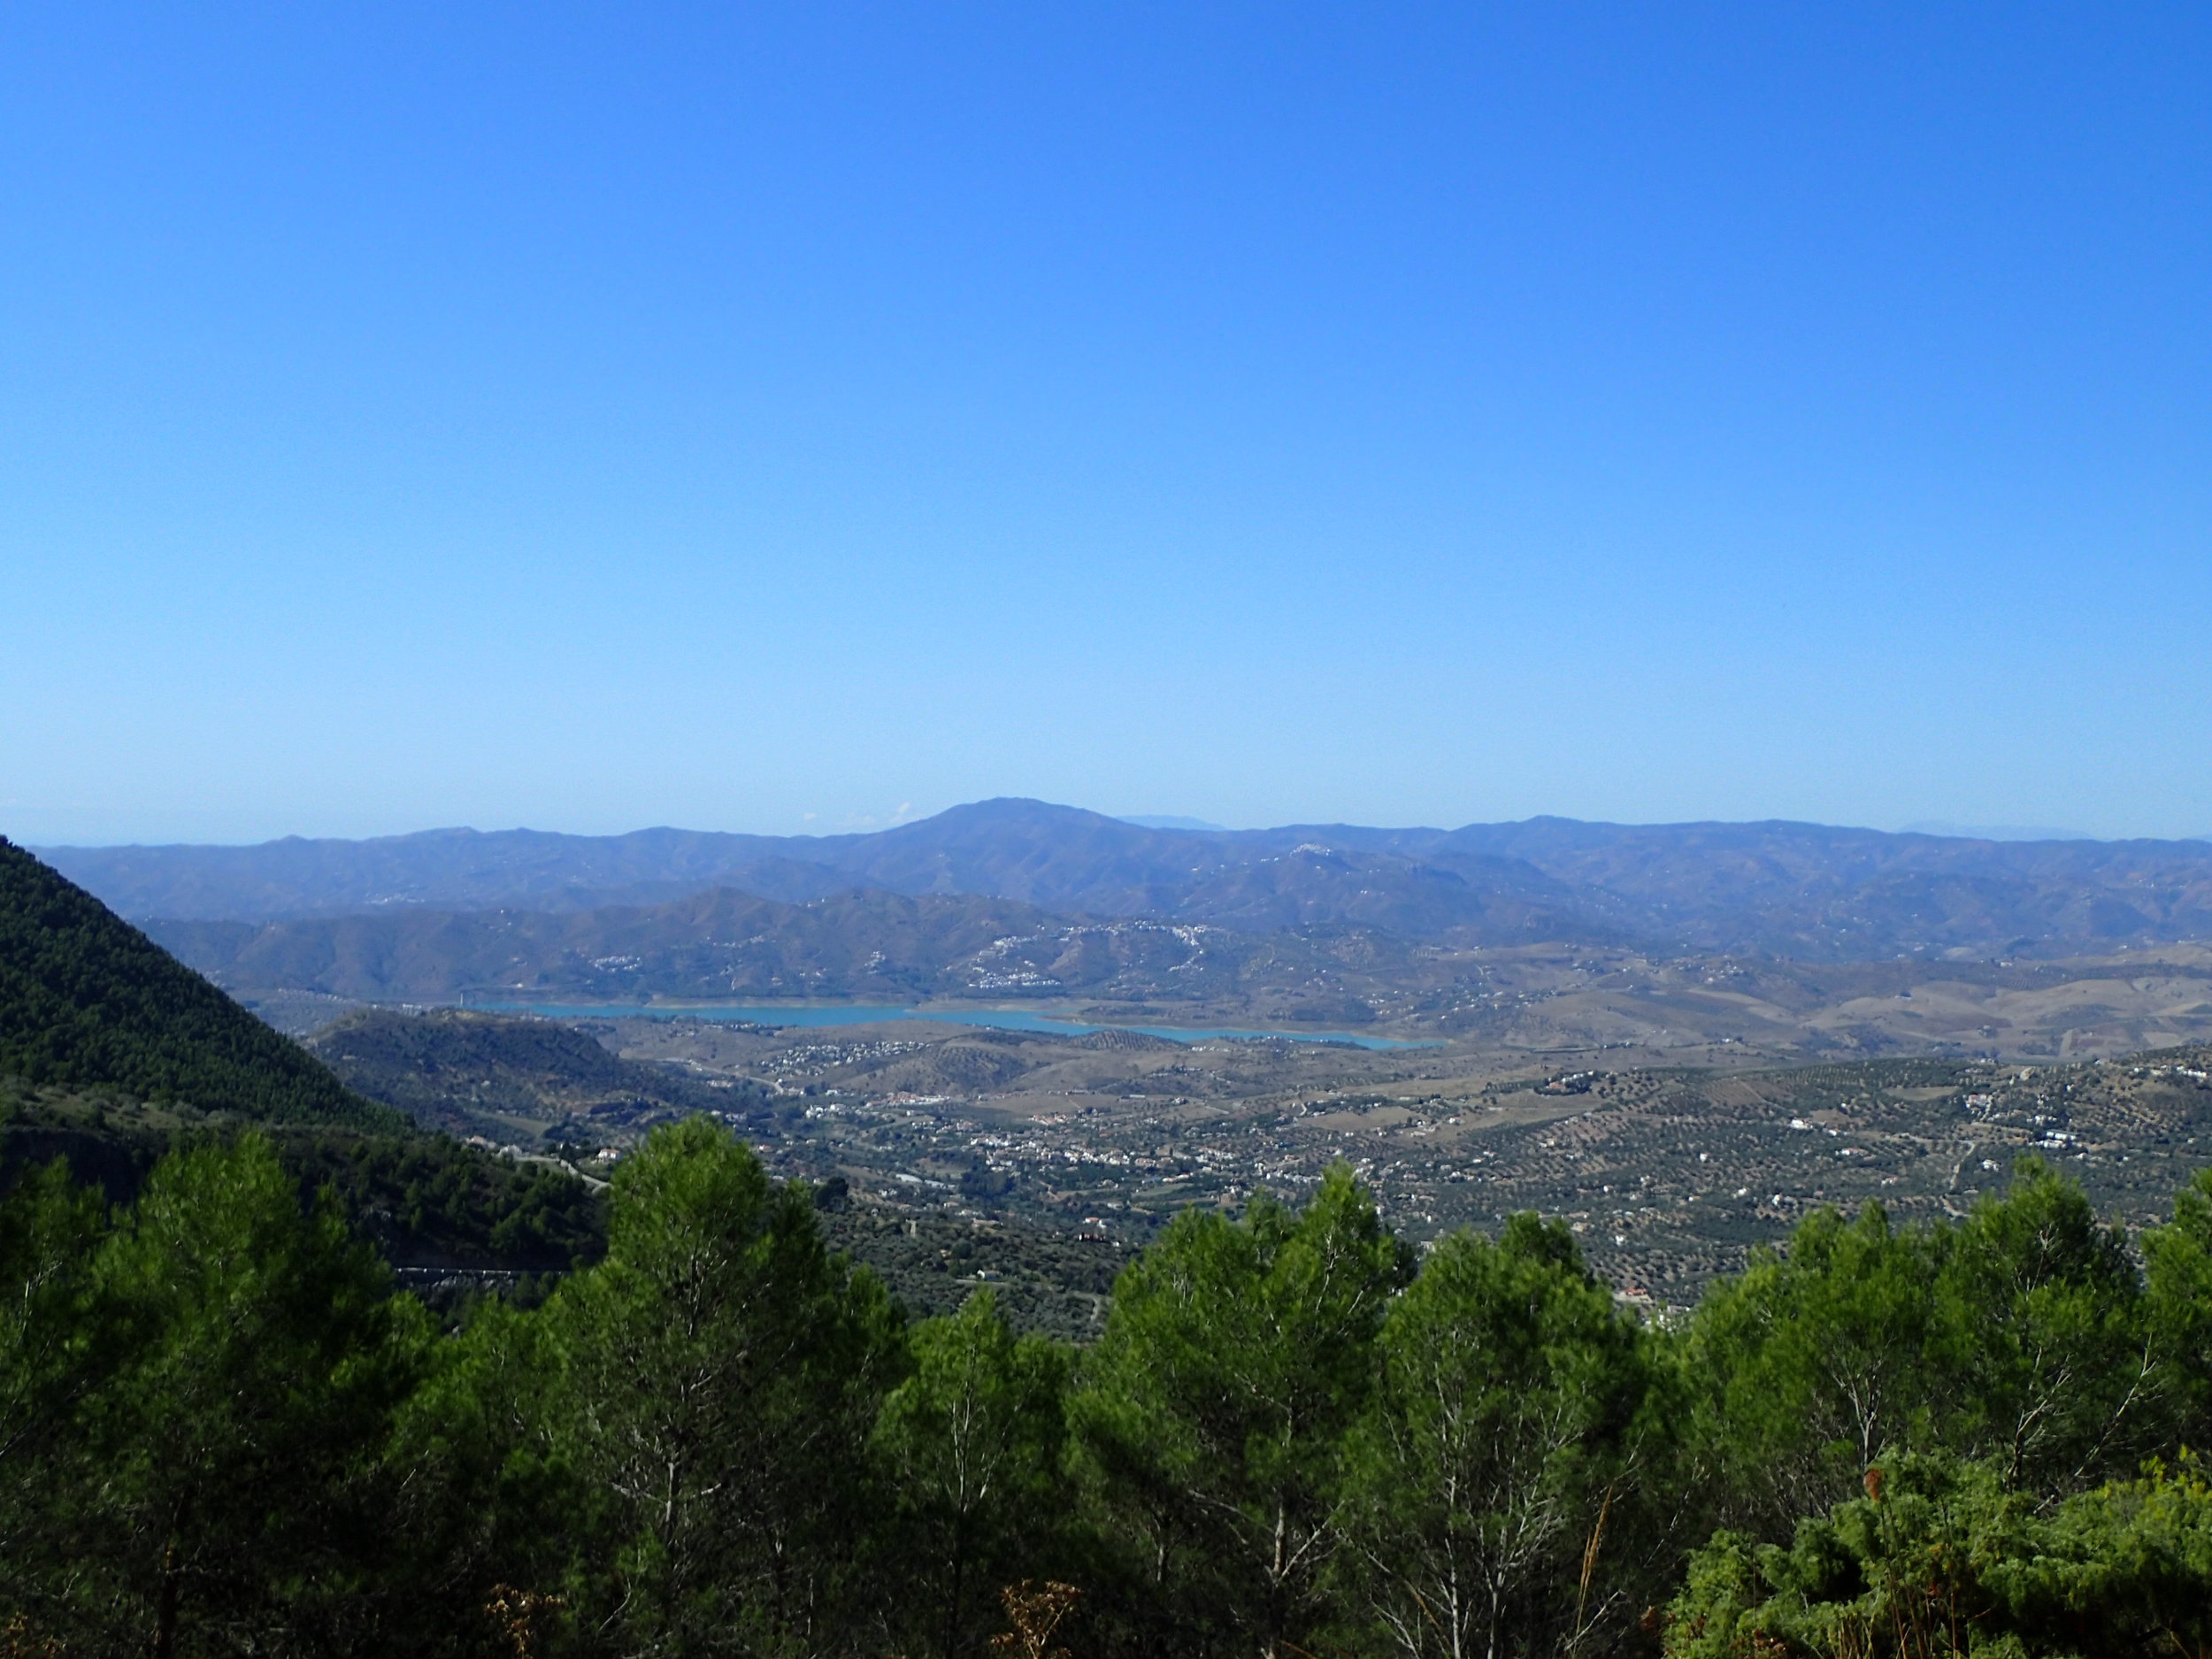 Amazing mountain views during hike at Yin Yang Yoga retreat in the Malaga mountains in Spain with Jane Bakx Yoga